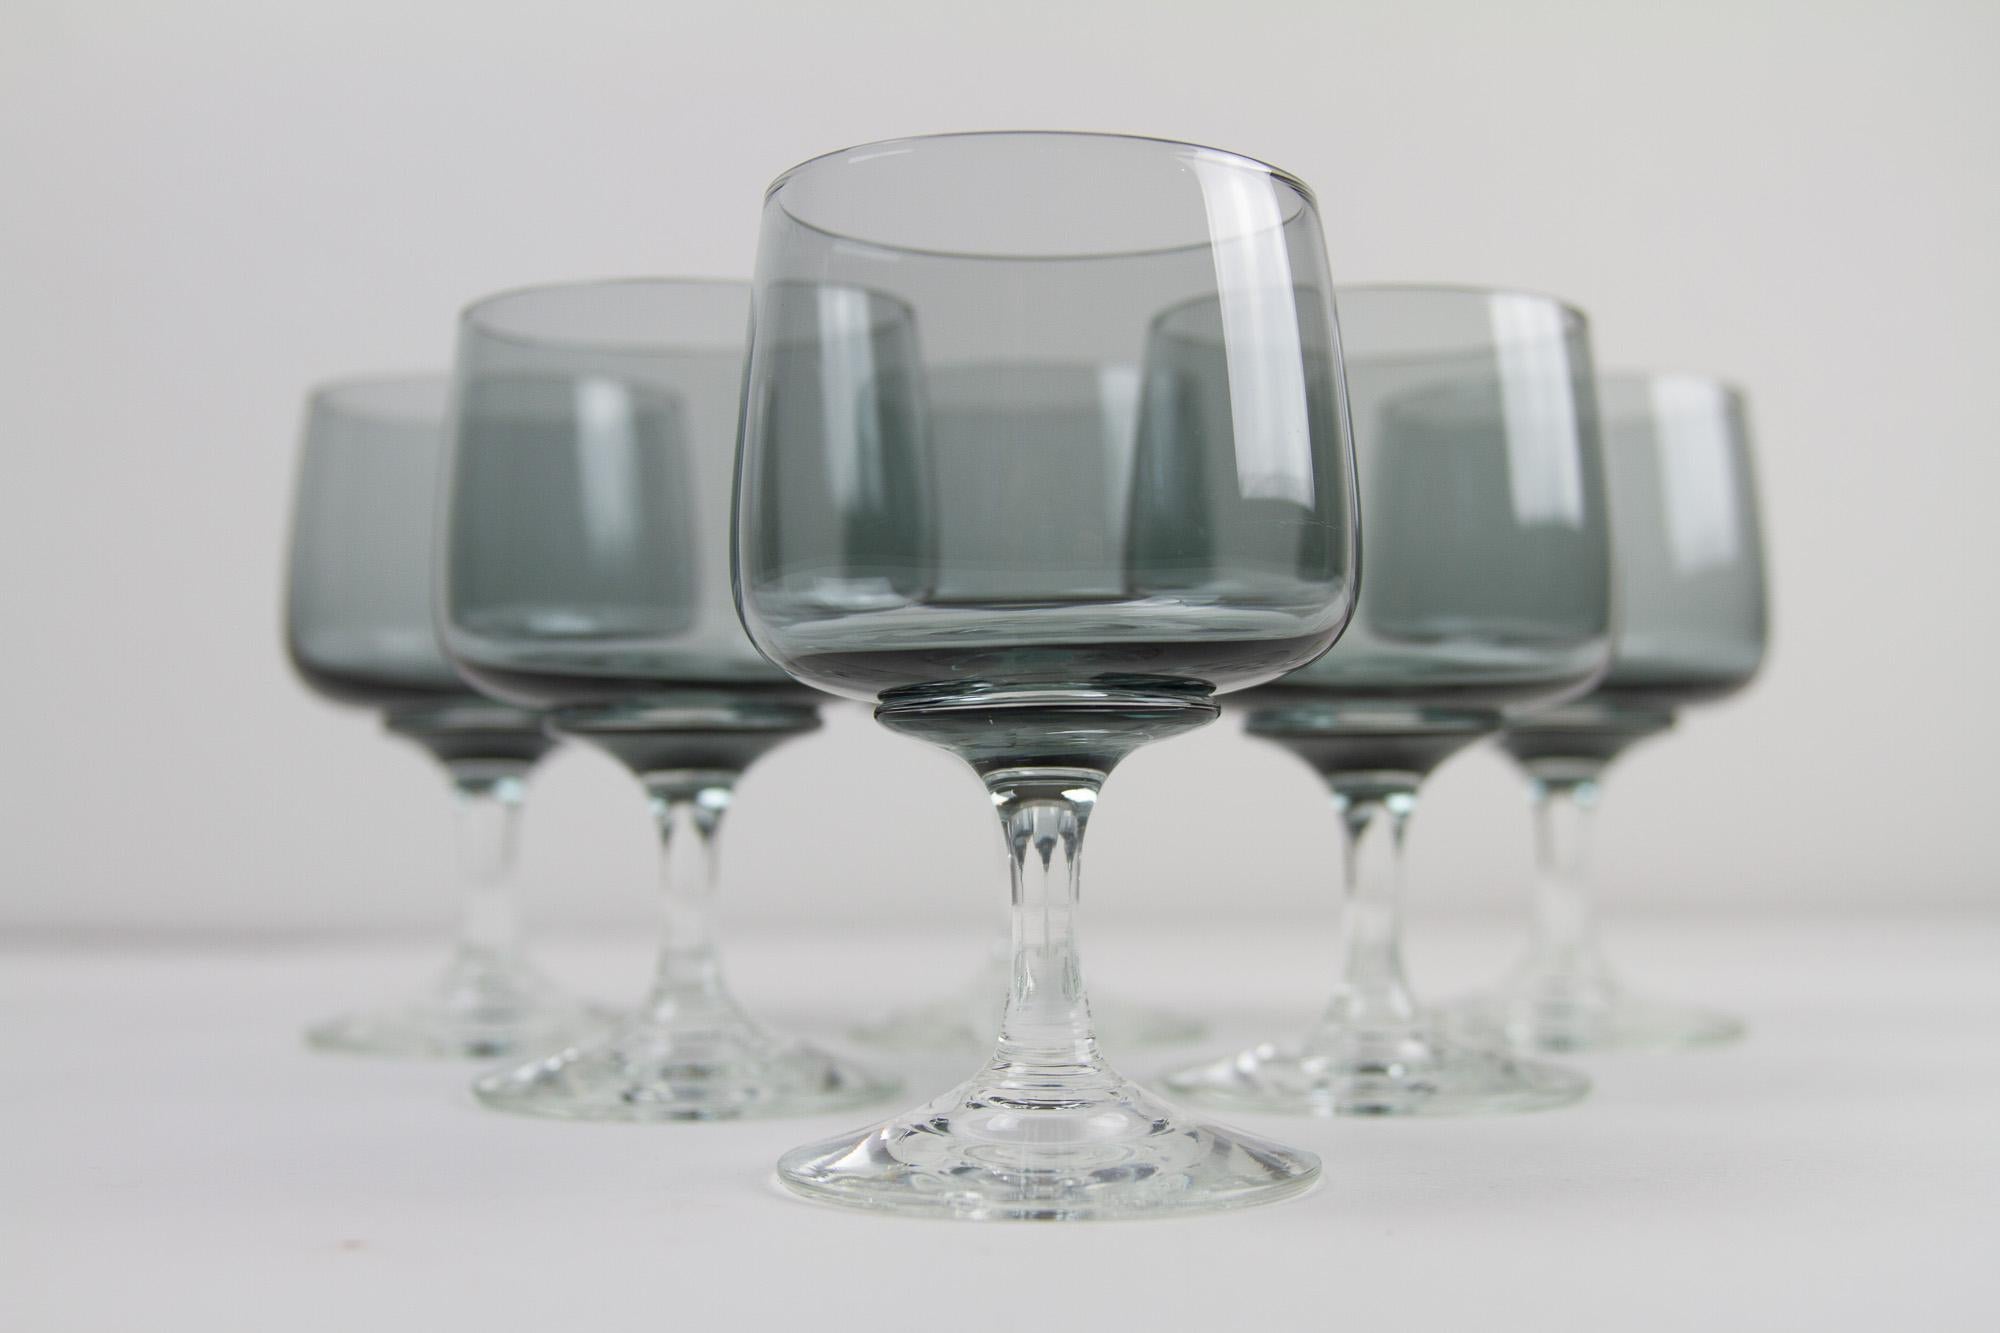 Vintage Danish Holmegaard Atlantic White Wine Glasses, 1960s. Set of 6.
Set of 6 beautiful hand-blown vintage drinking glasses from Danish glasswork Holmegaard designed by Per Lütken in 1962. These were only manufactured between 1962 and 1975. 
The